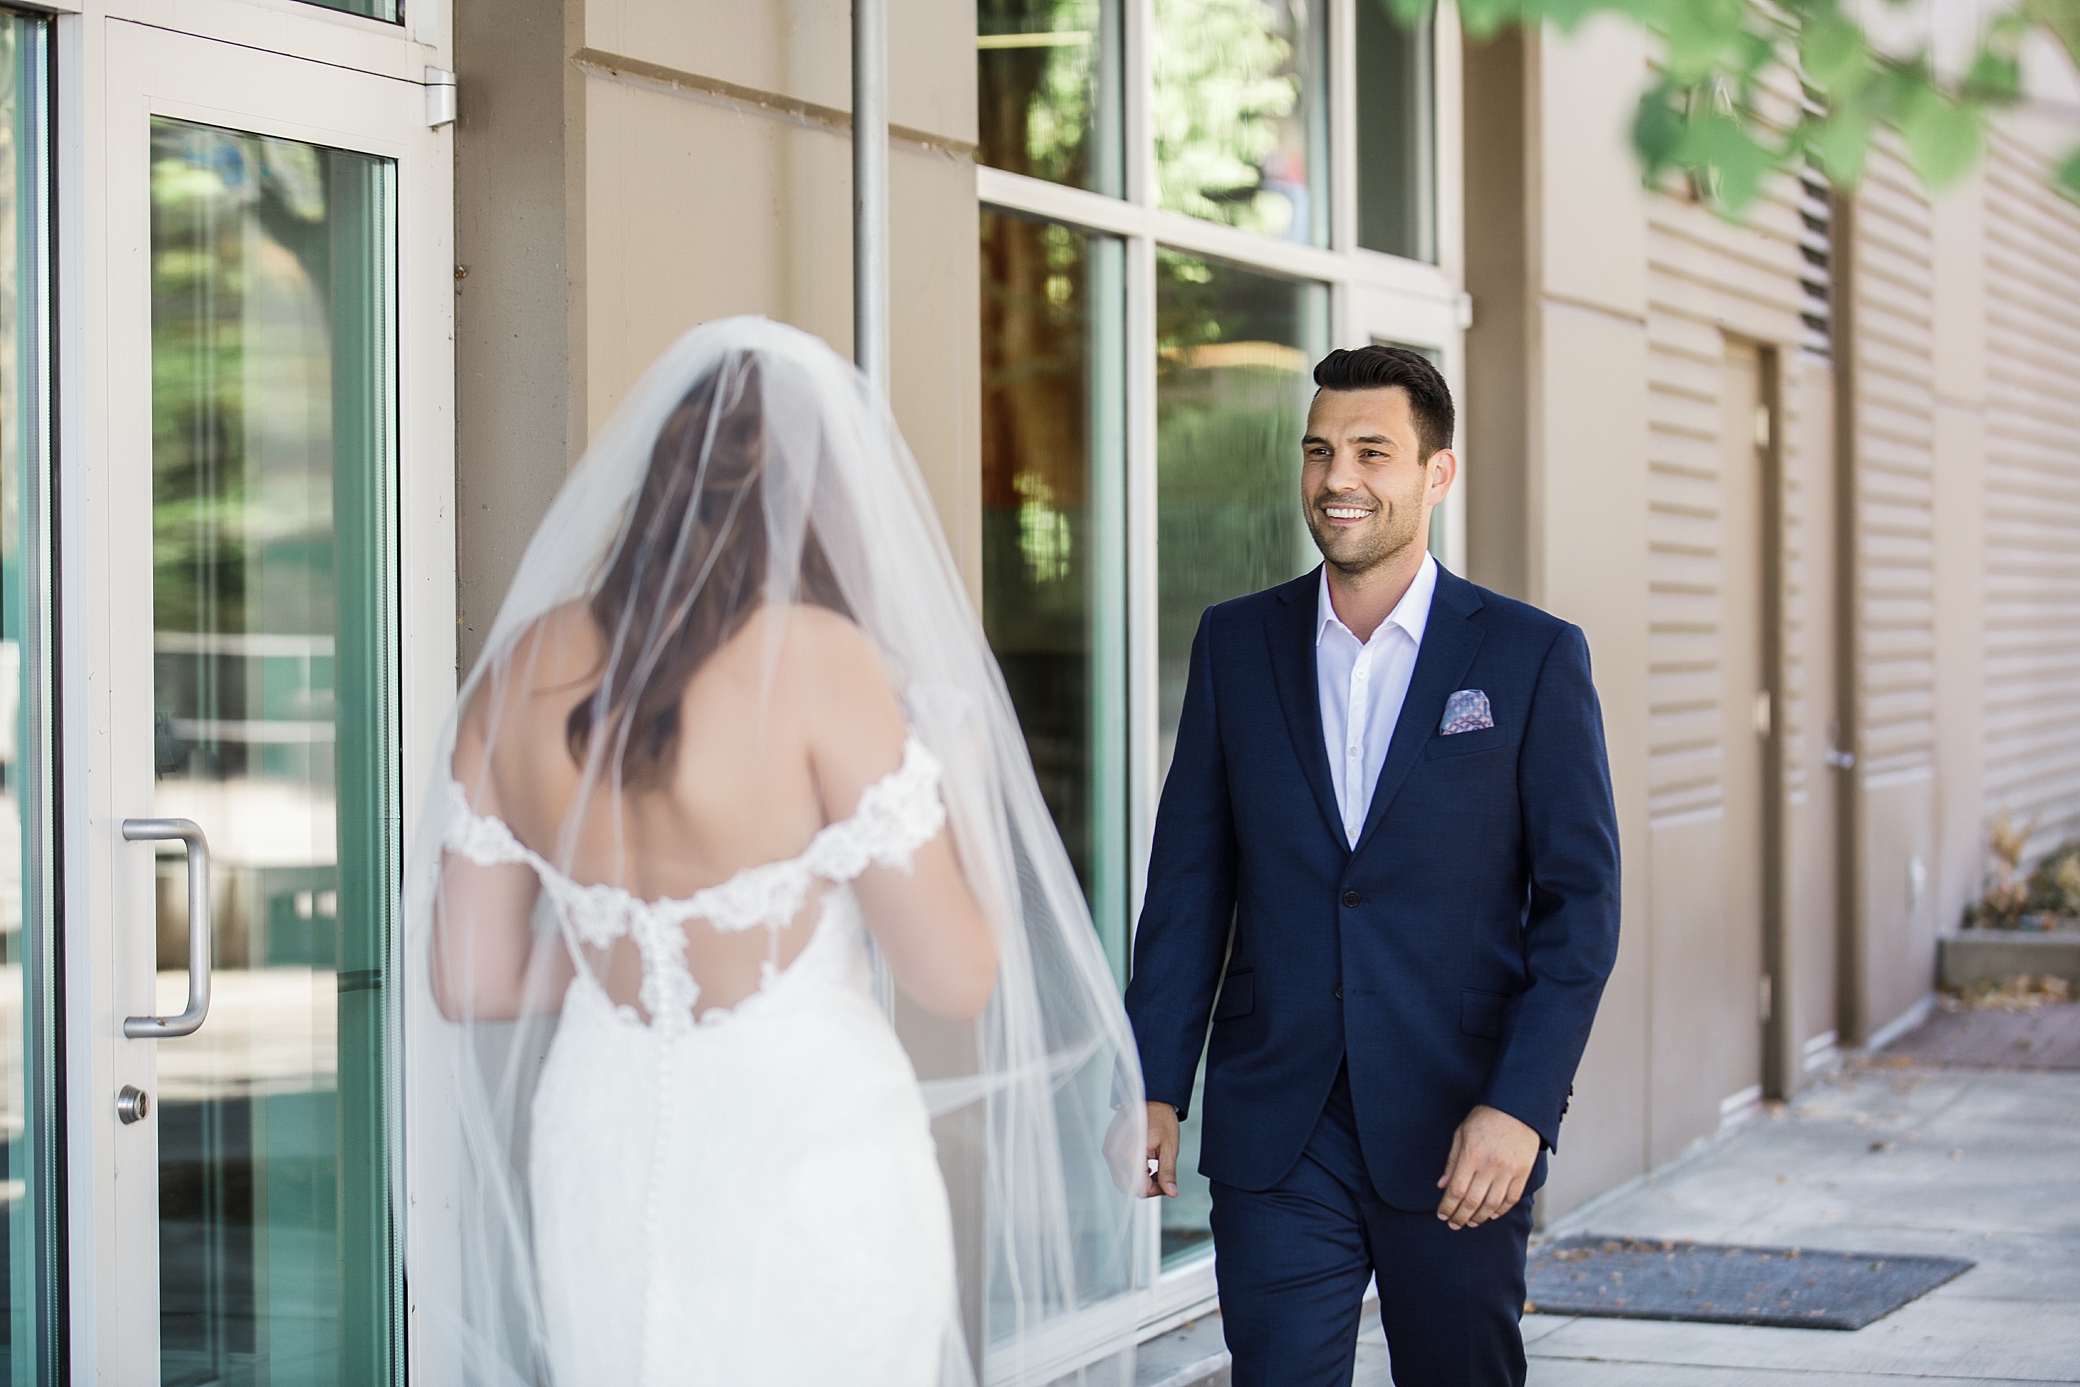 First look in Downtown Tacoma, WA | Megan Montalvo Photography